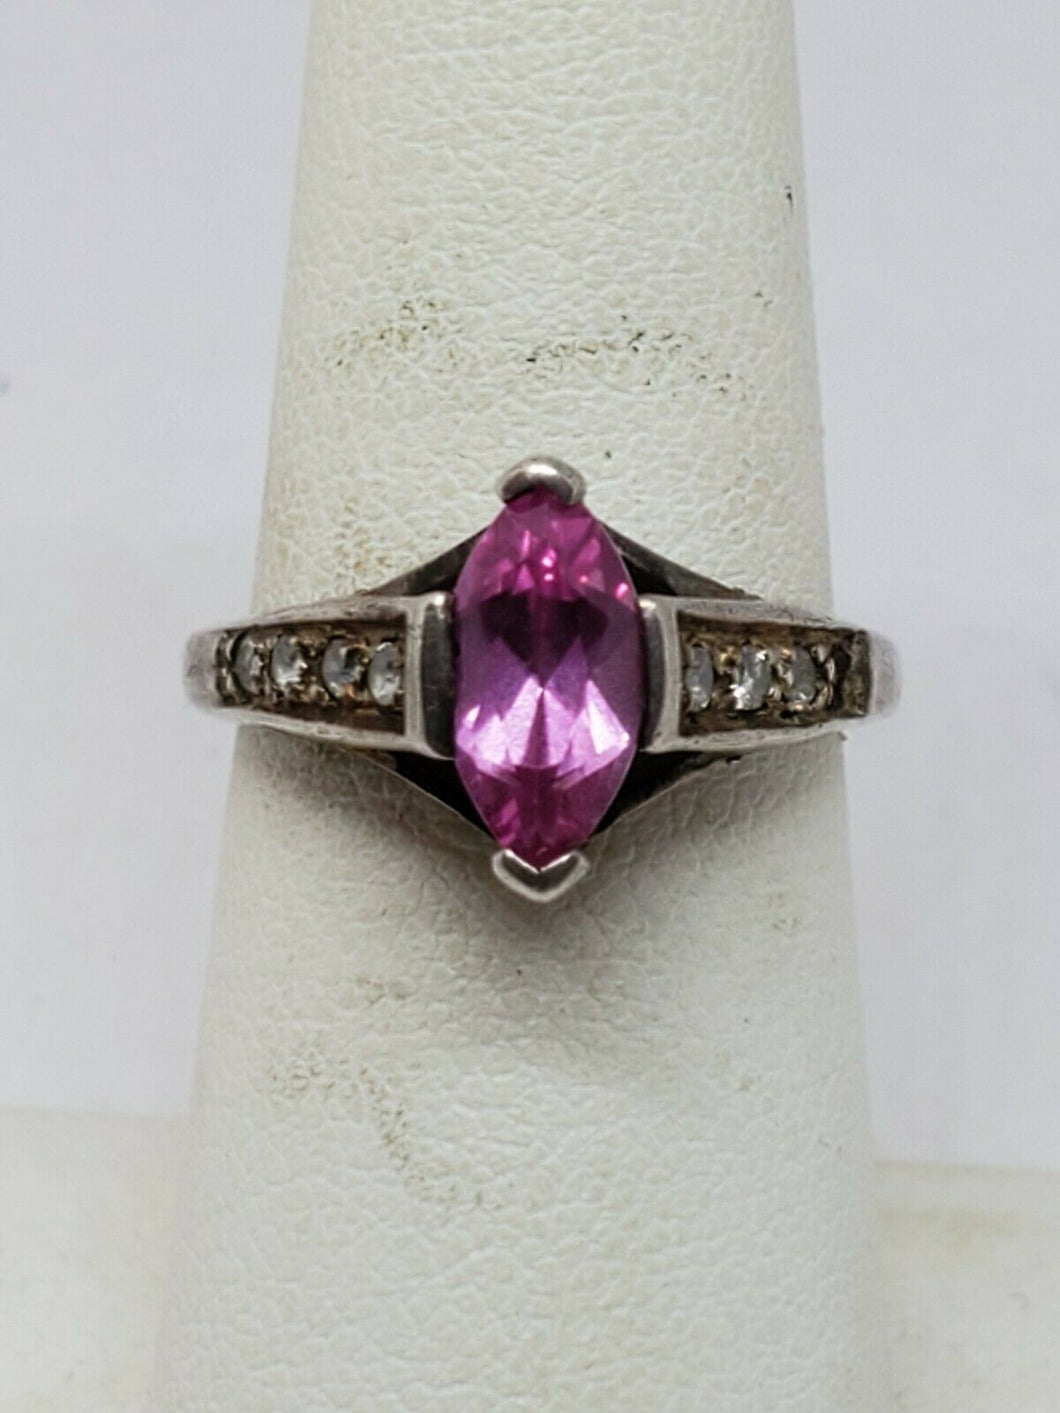 Vintage Avon Sterling Silver Pink Sapphire And Cubic Zirconia Ring Size 6.25...